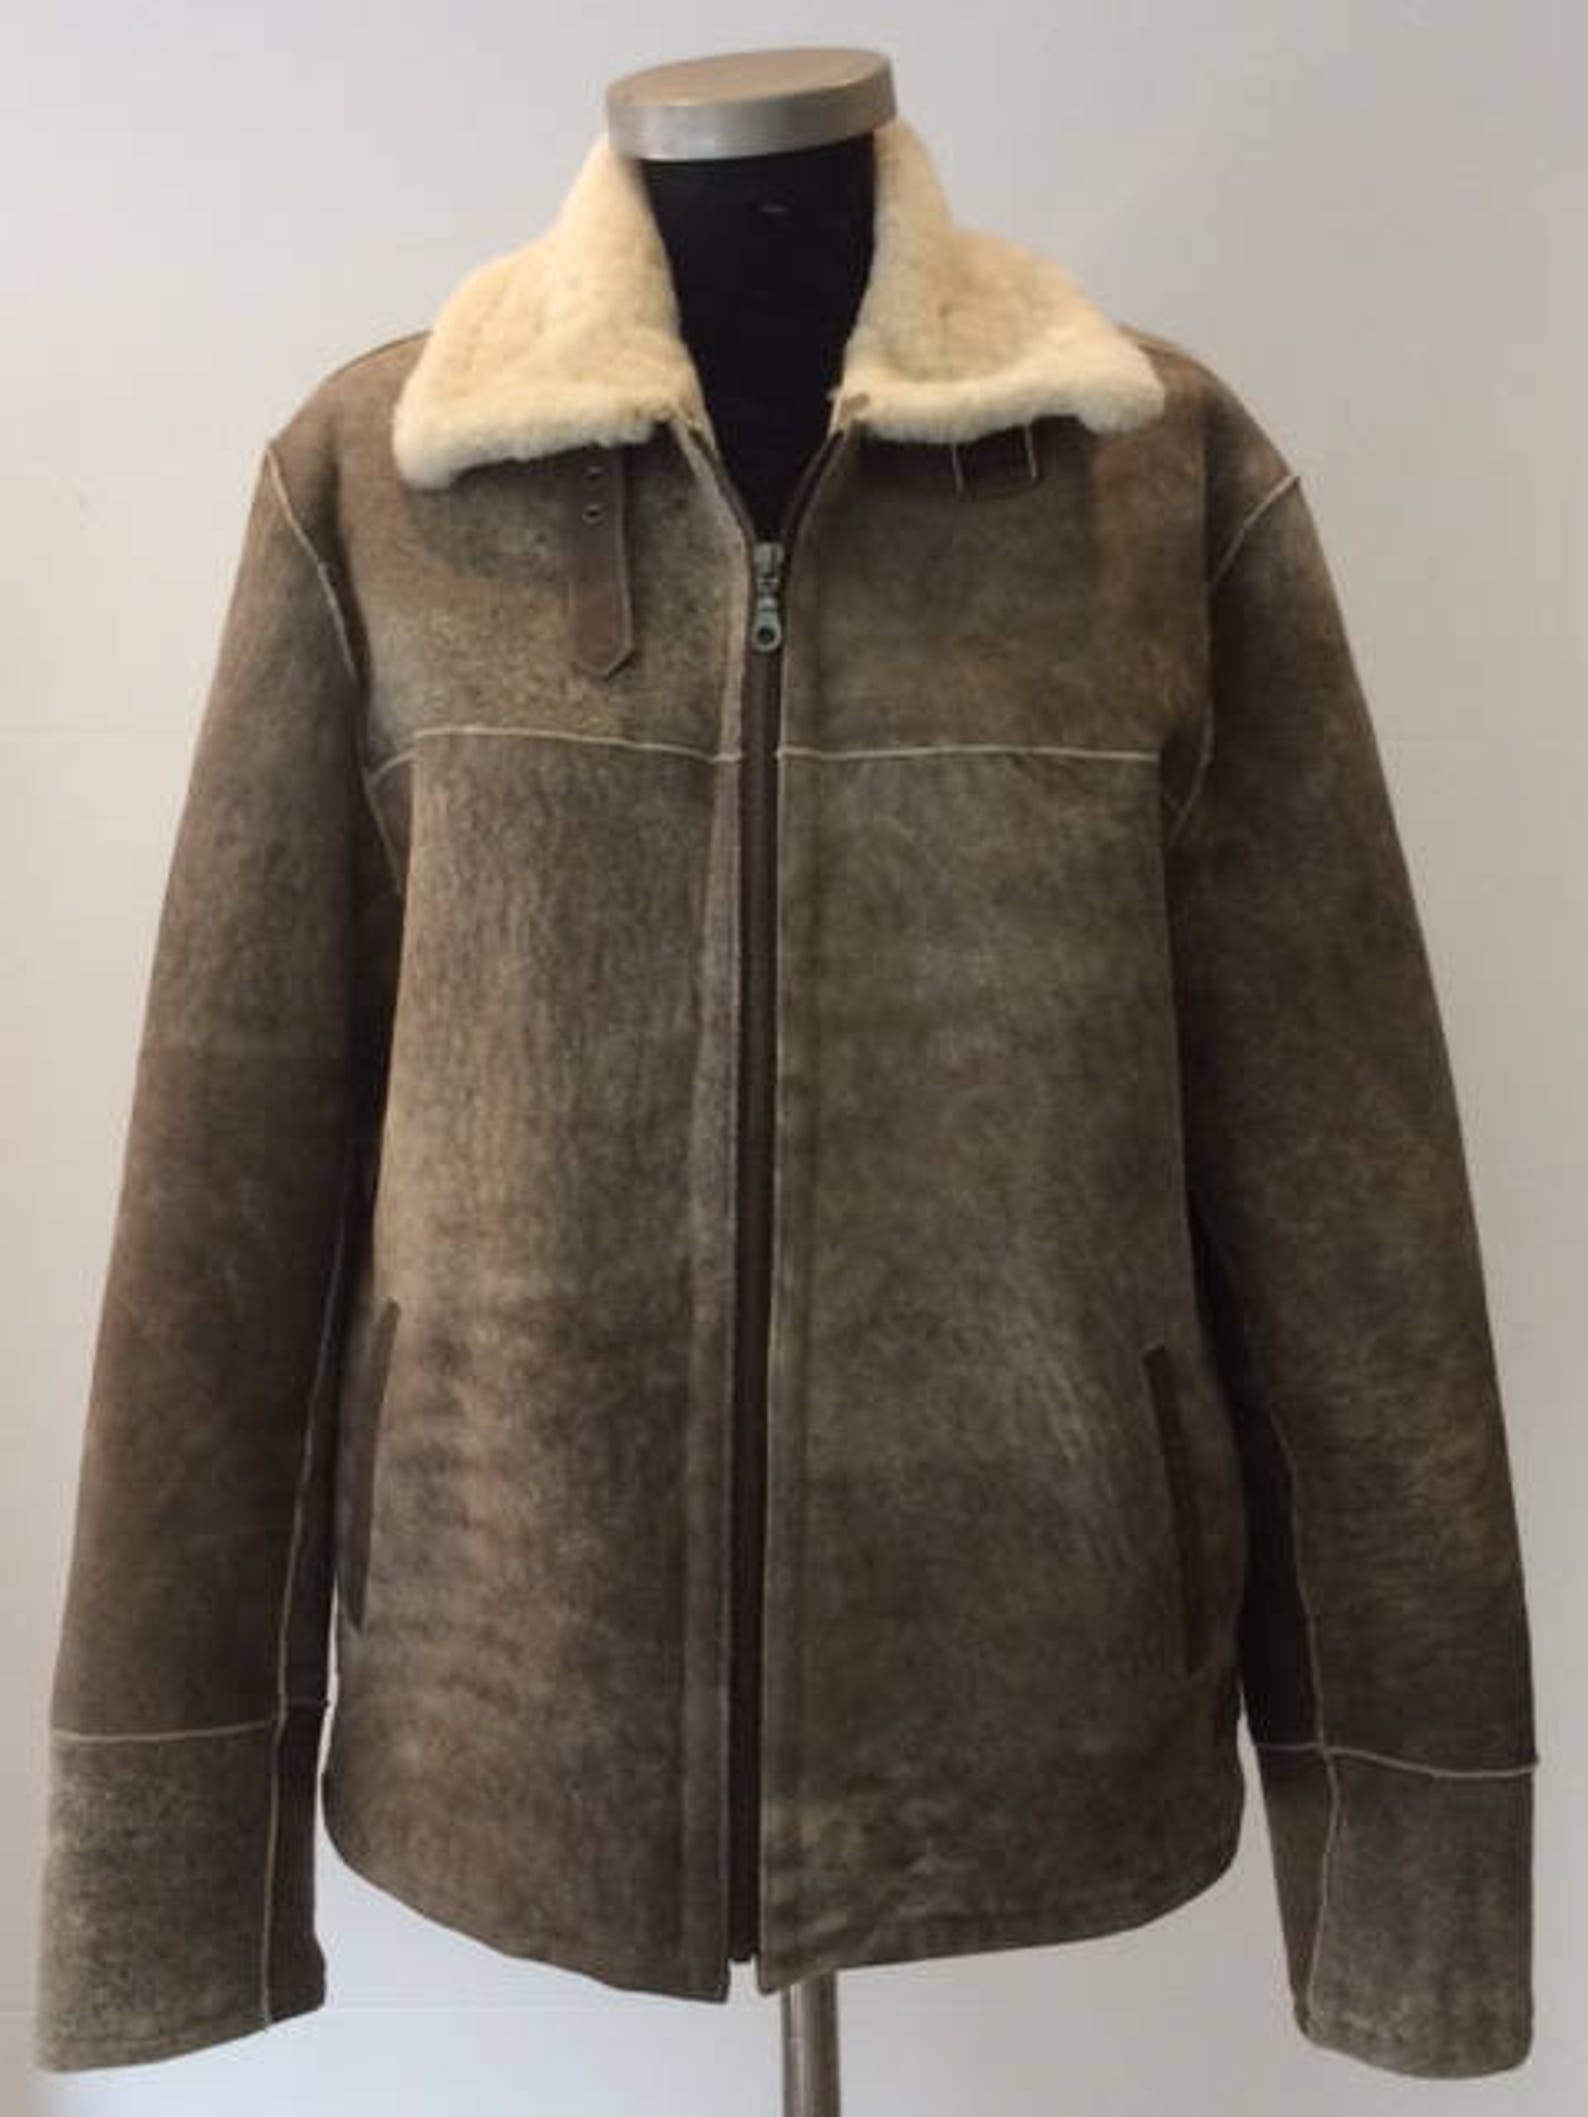 Custom Made Shearling Jacket for Men Warm Wool Sustainably Sourced ...